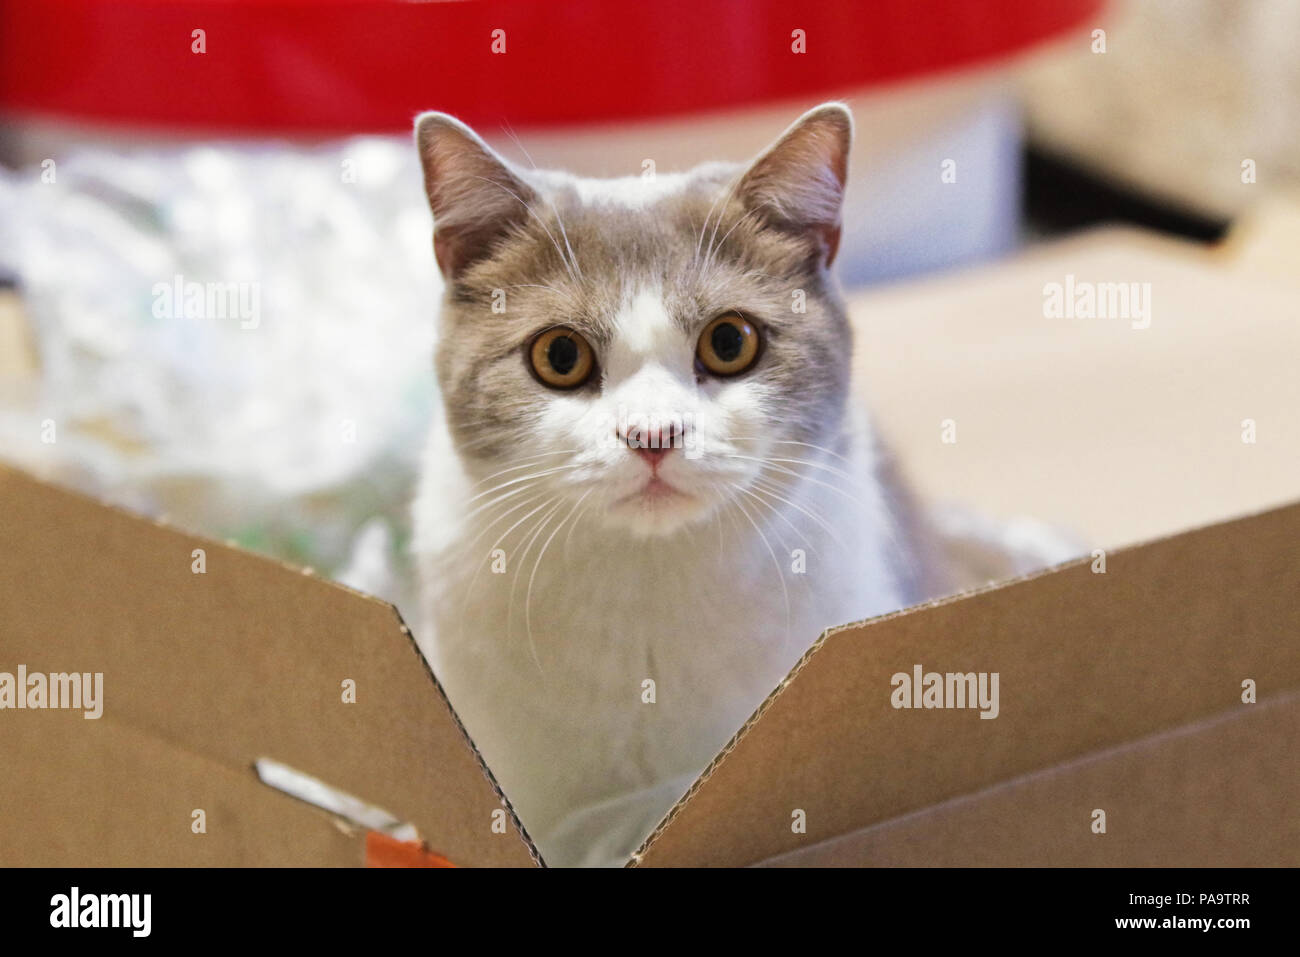 Cat looks out surprised towards camera from a packaging board Stock Photo